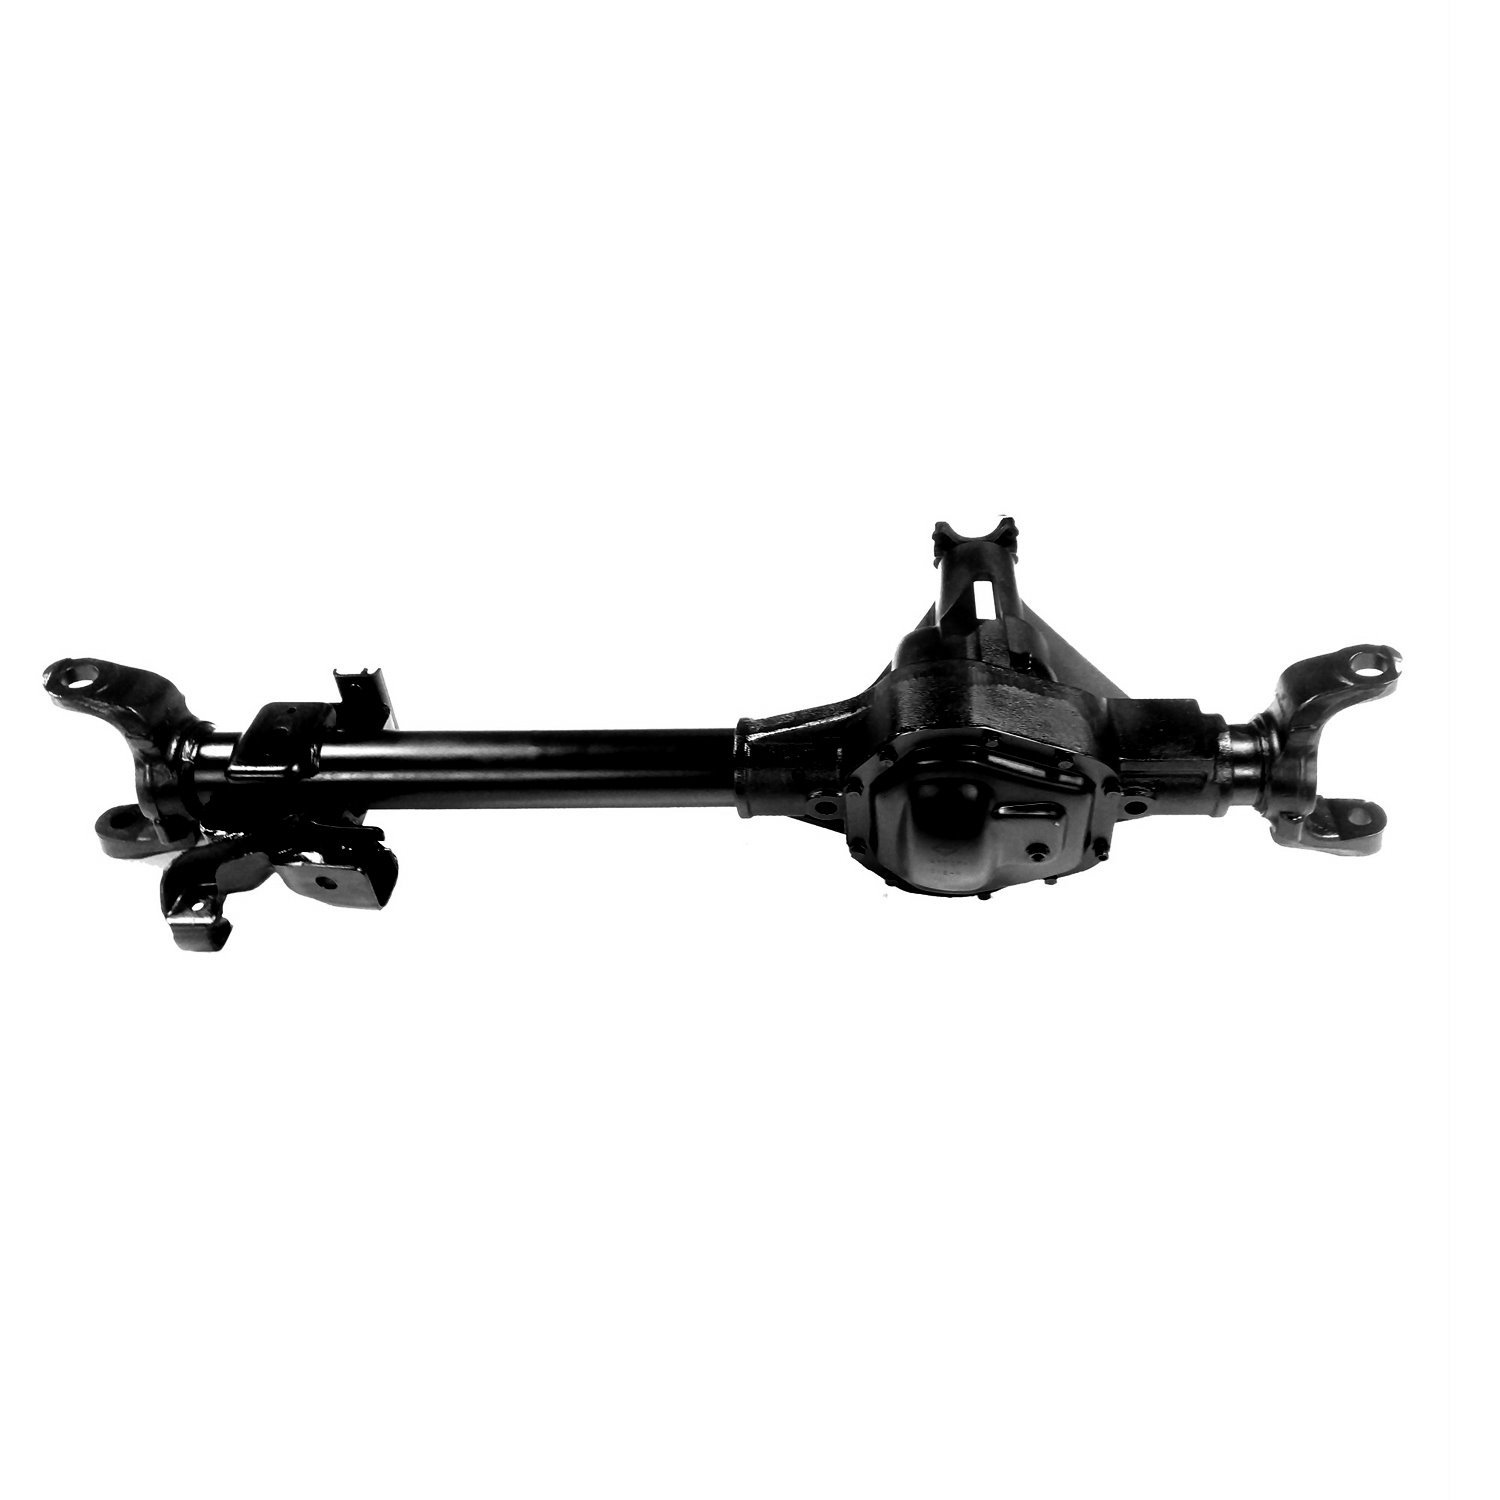 Remanufactured Complete Axle Assembly for Dana 60 08-10 F350 4.30, DRW w/o Wide Track